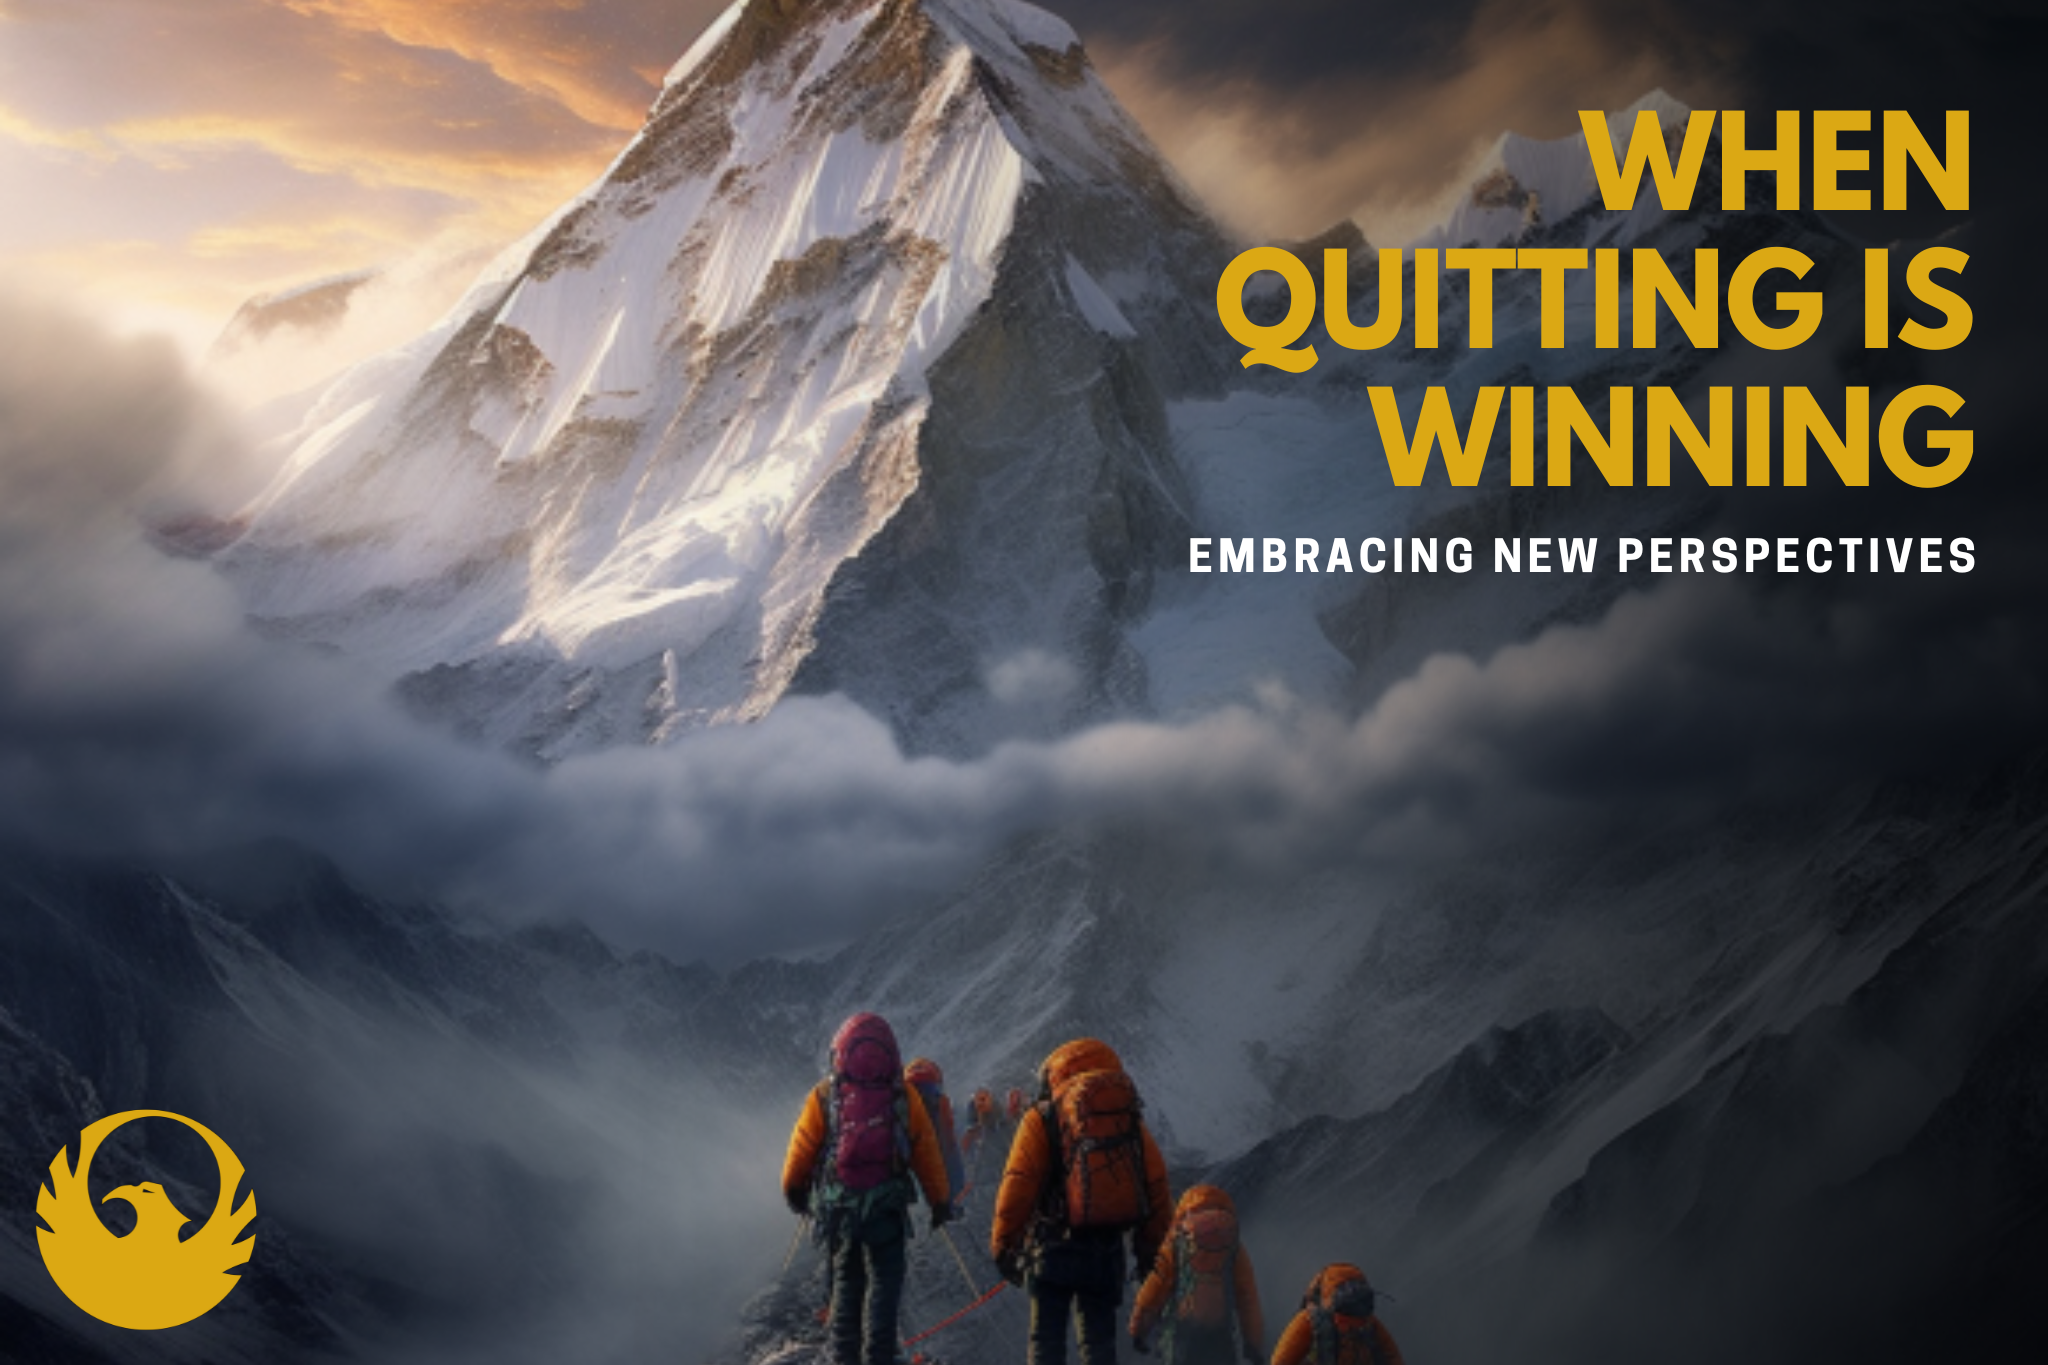 When Quitting is Winning: Embracing New Perspectives